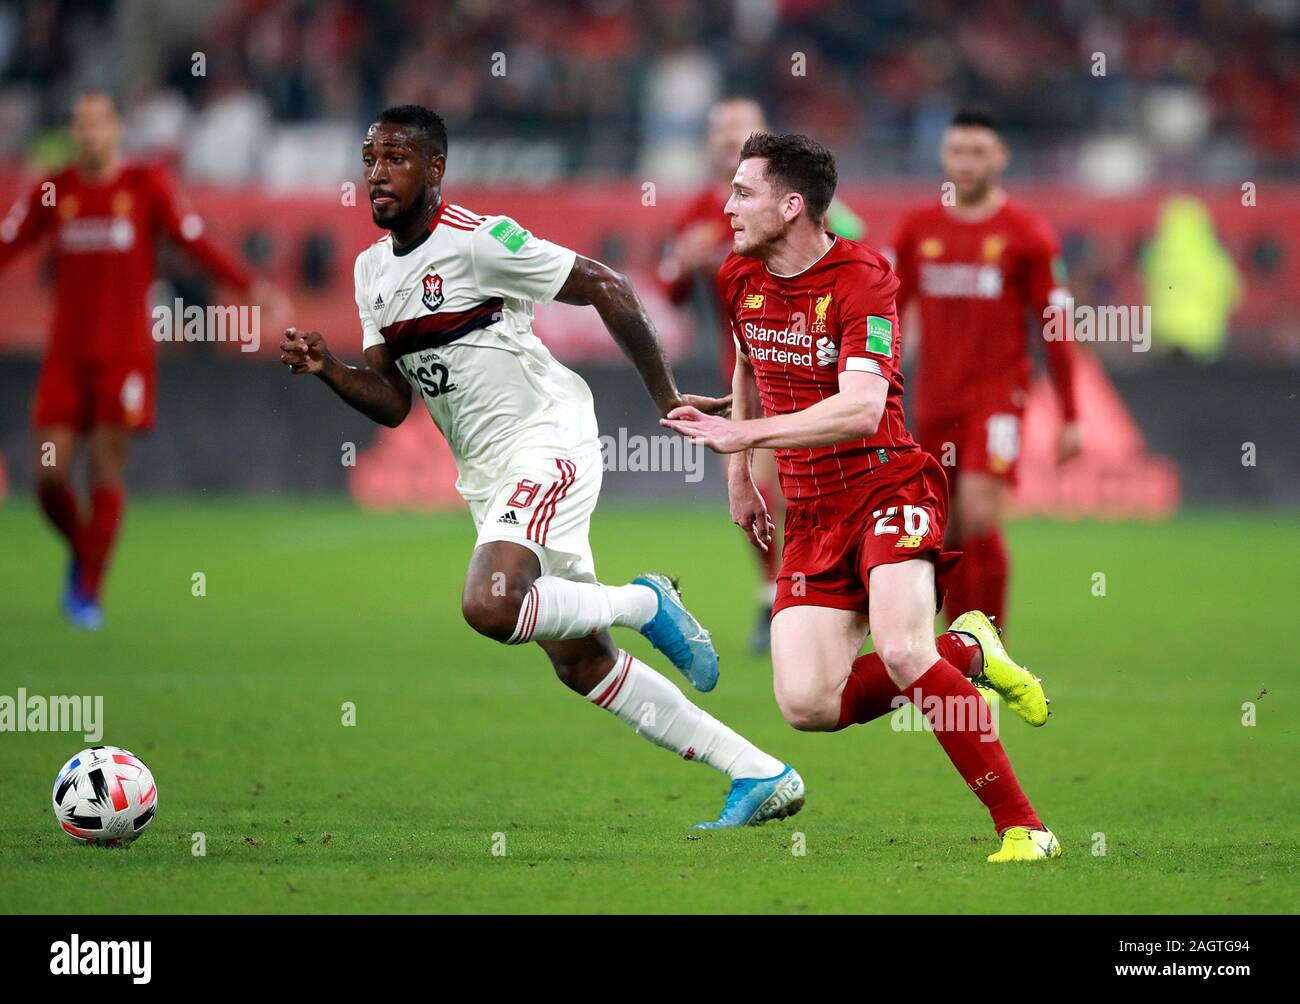 Flamengo's Gerson (left) and Liverpool's Andrew Robertson (right) battle for the ball during the FIFA Club World Cup final at the Khalifa International Stadium, Doha. Stock Photo